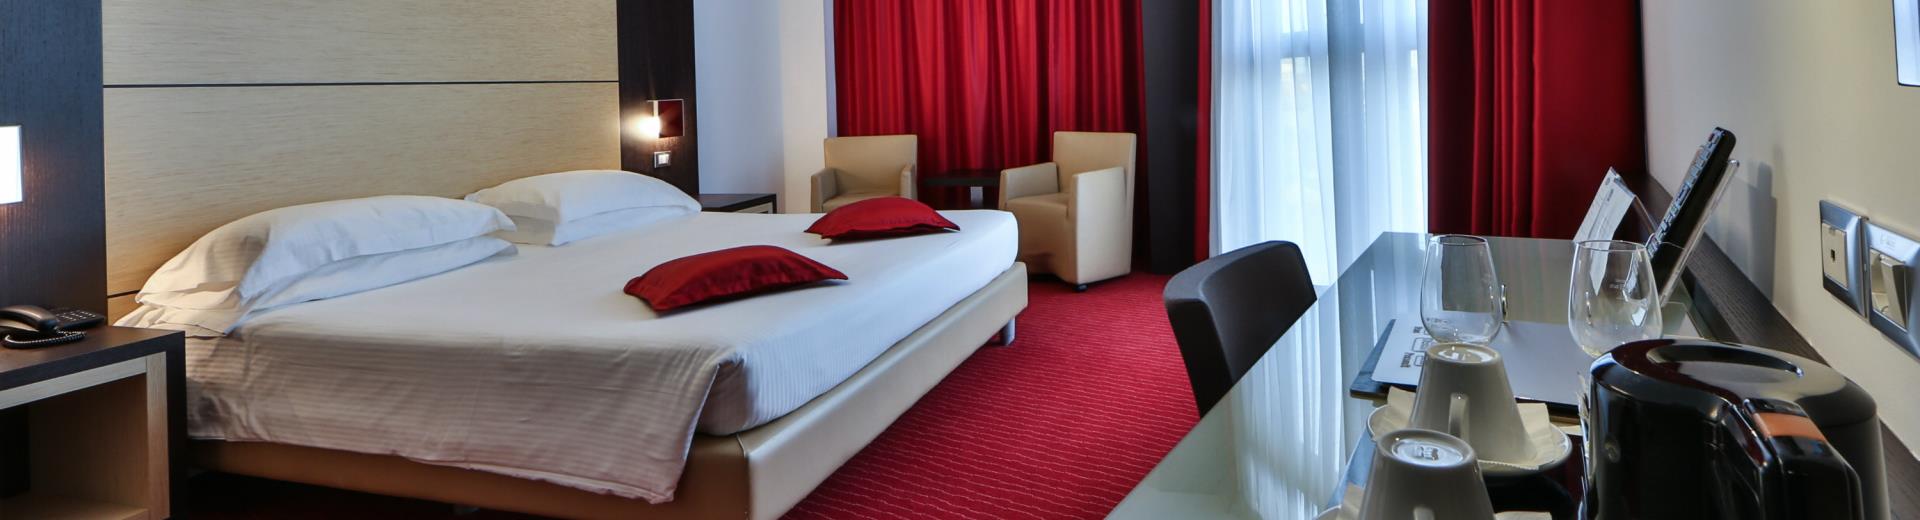 Discover the comfort and the services of Best Western Plus Hotel Galileo Padova